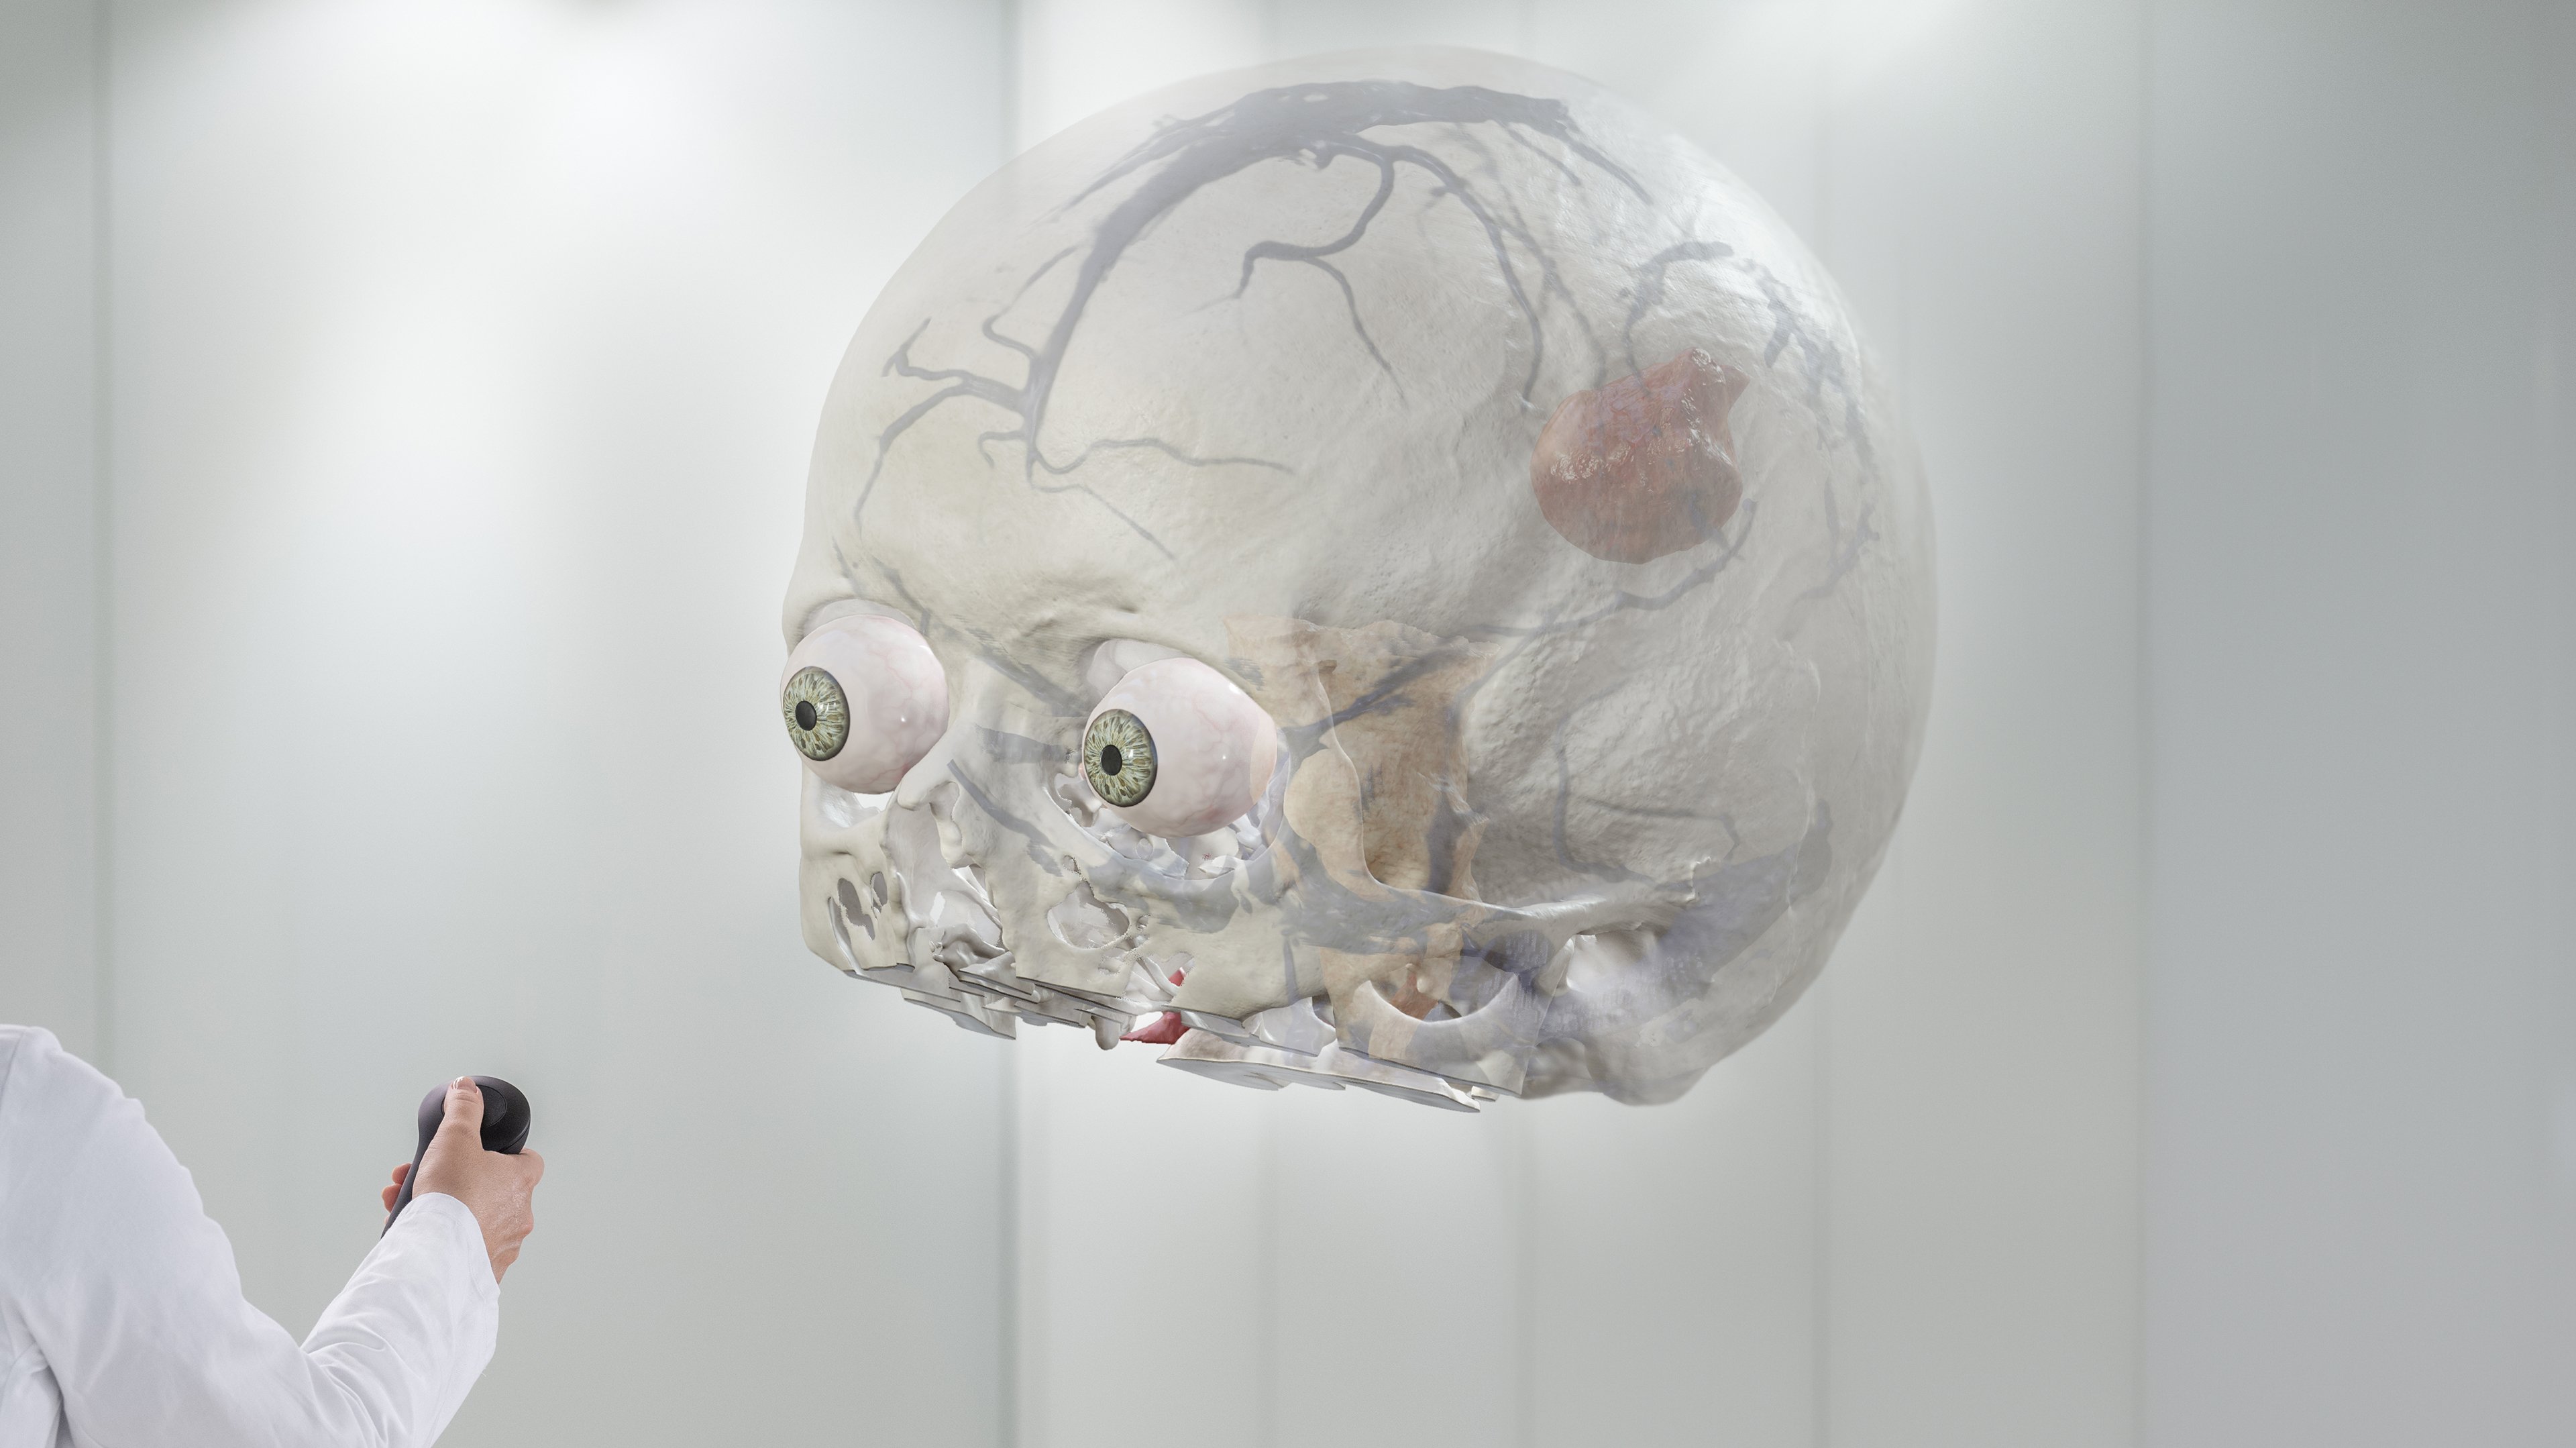 Mixed Reality Viewer in action, displaying cranial image